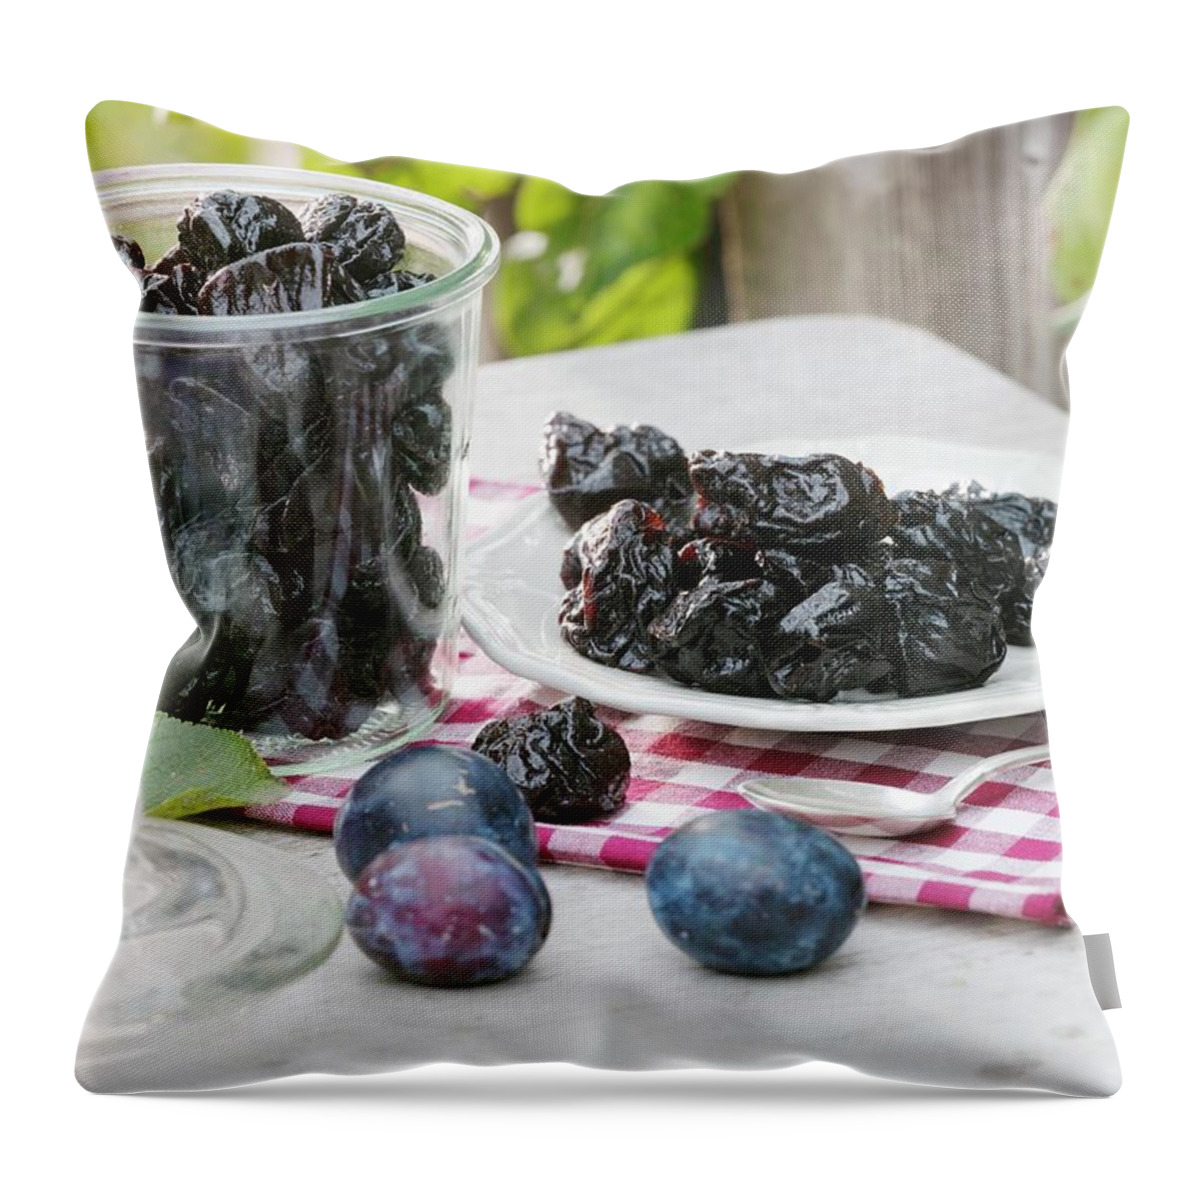 Ip_00296211 Throw Pillow featuring the photograph Prunes On Plate And In Jar by Strauss, Friedrich